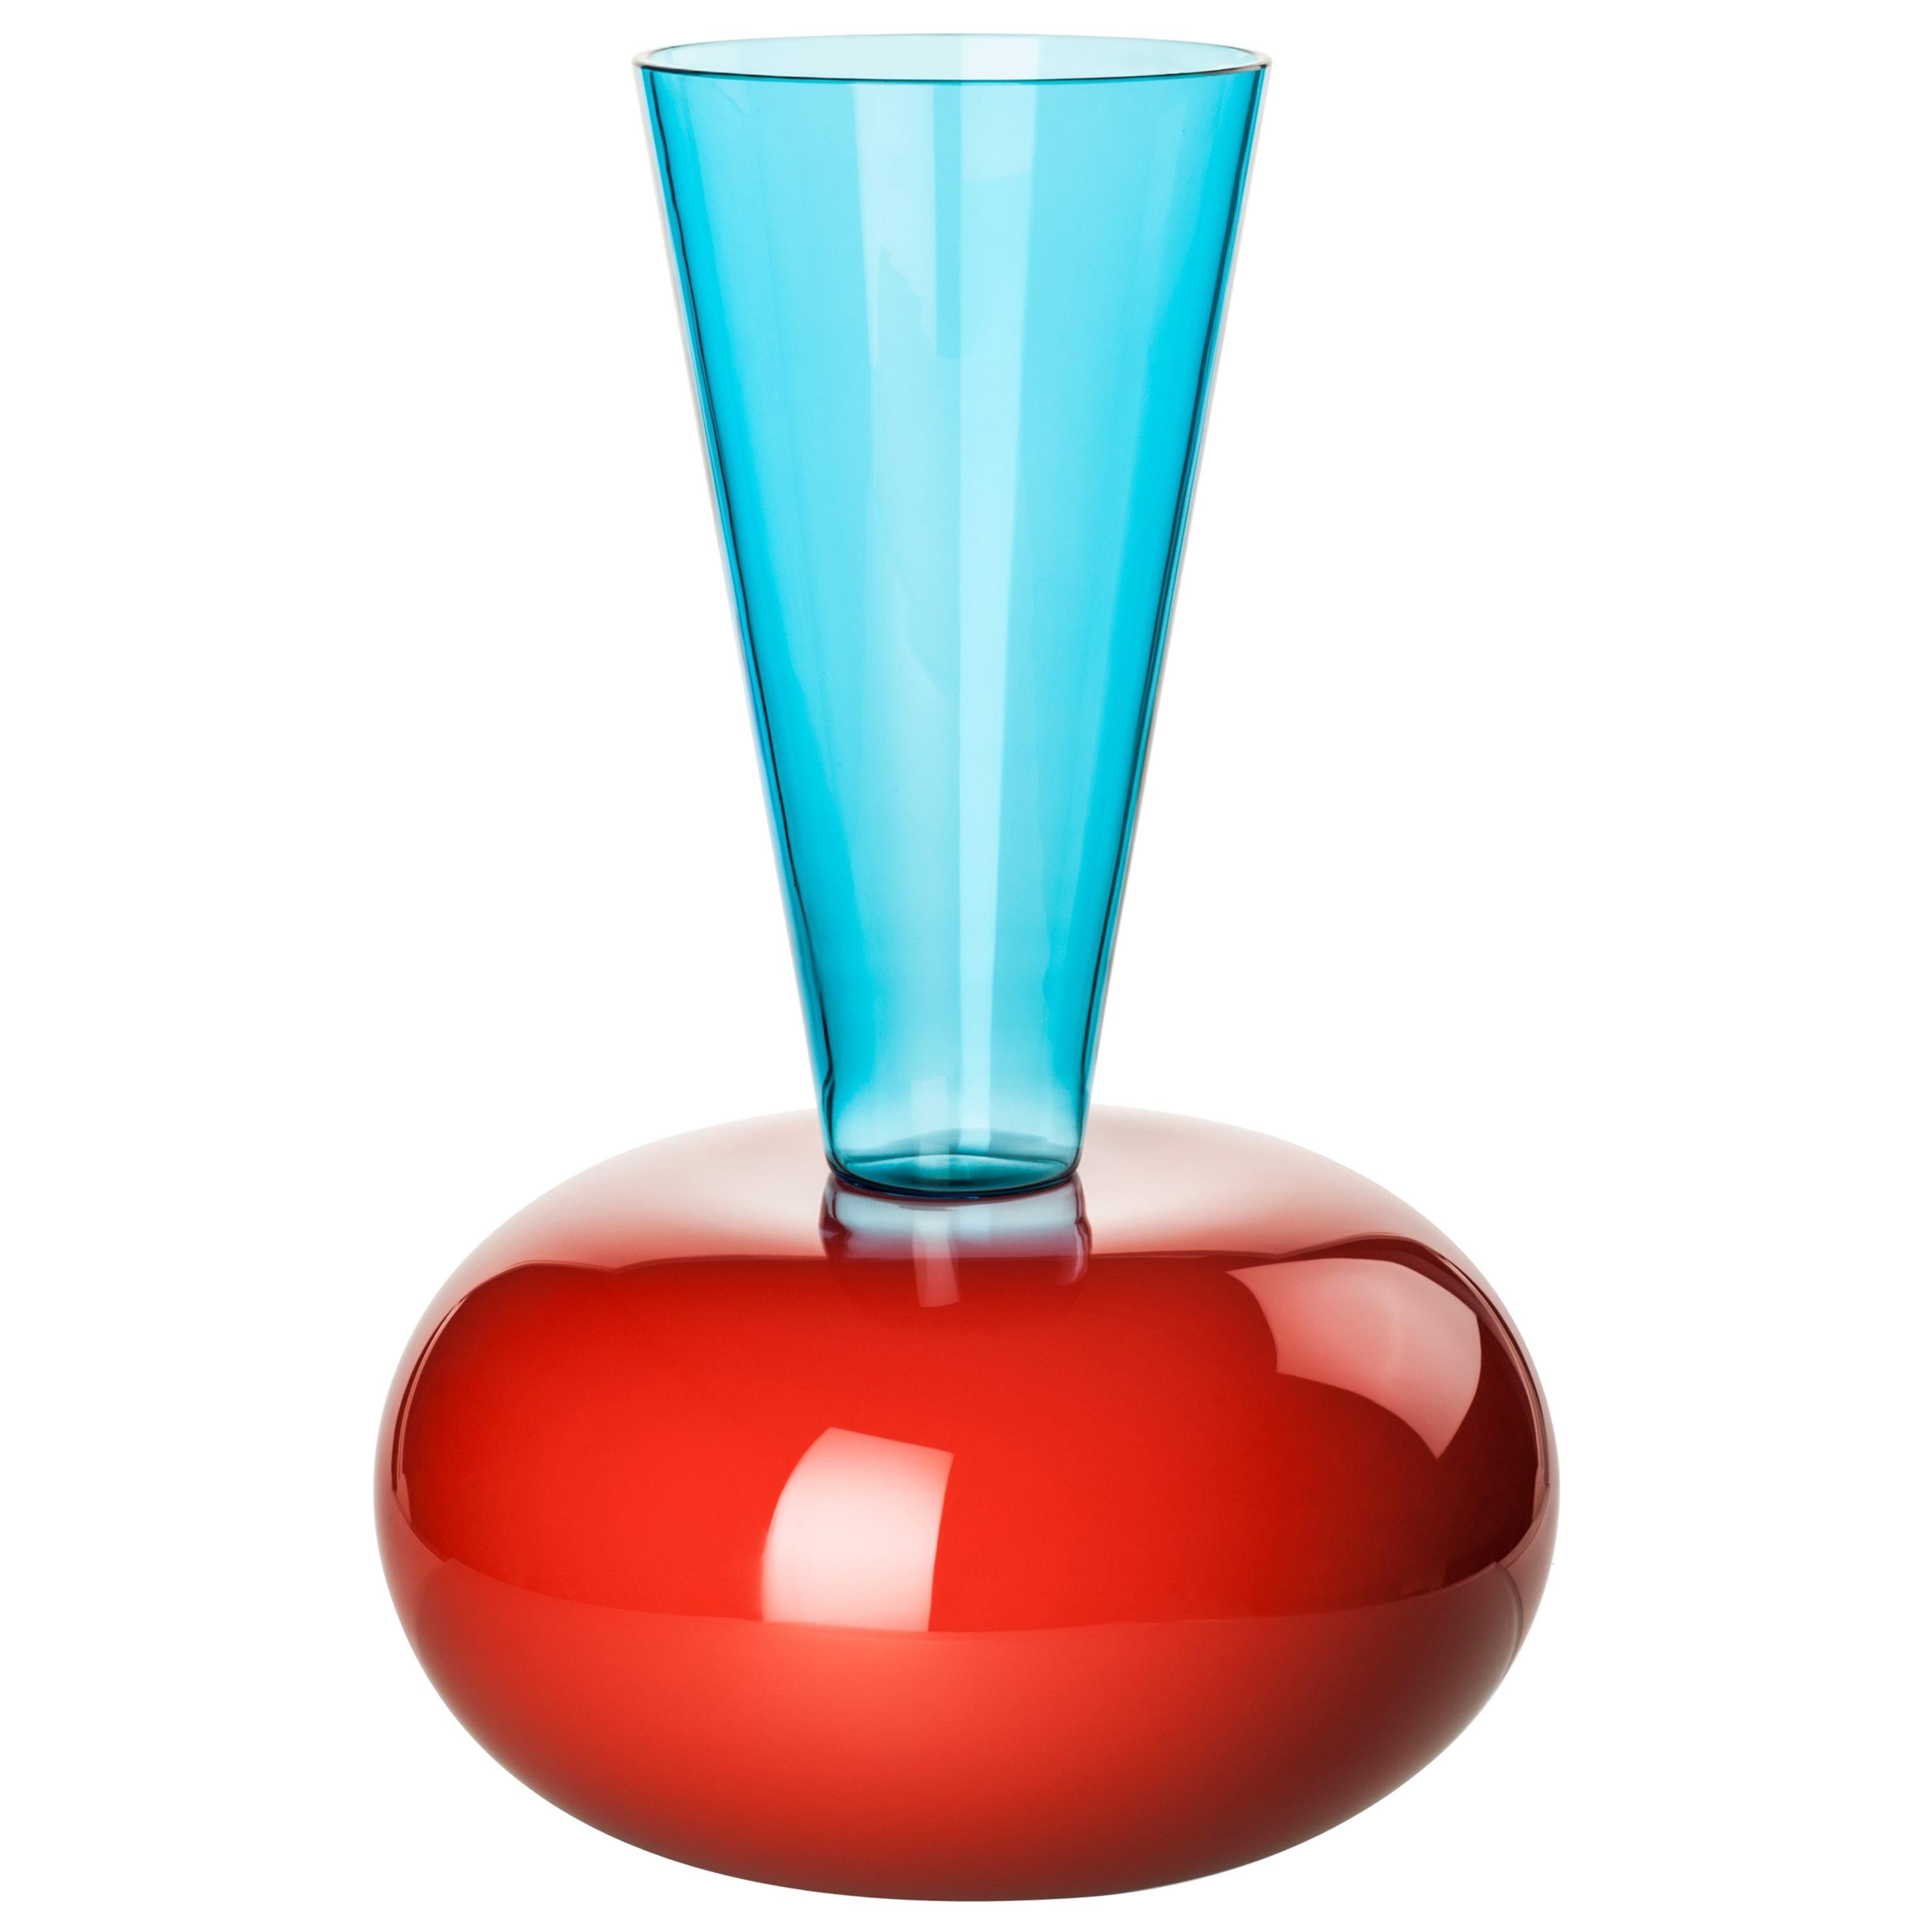 Venini Puzzle Vase in Coral & Aquamarine Glass by Ettore Sottsass